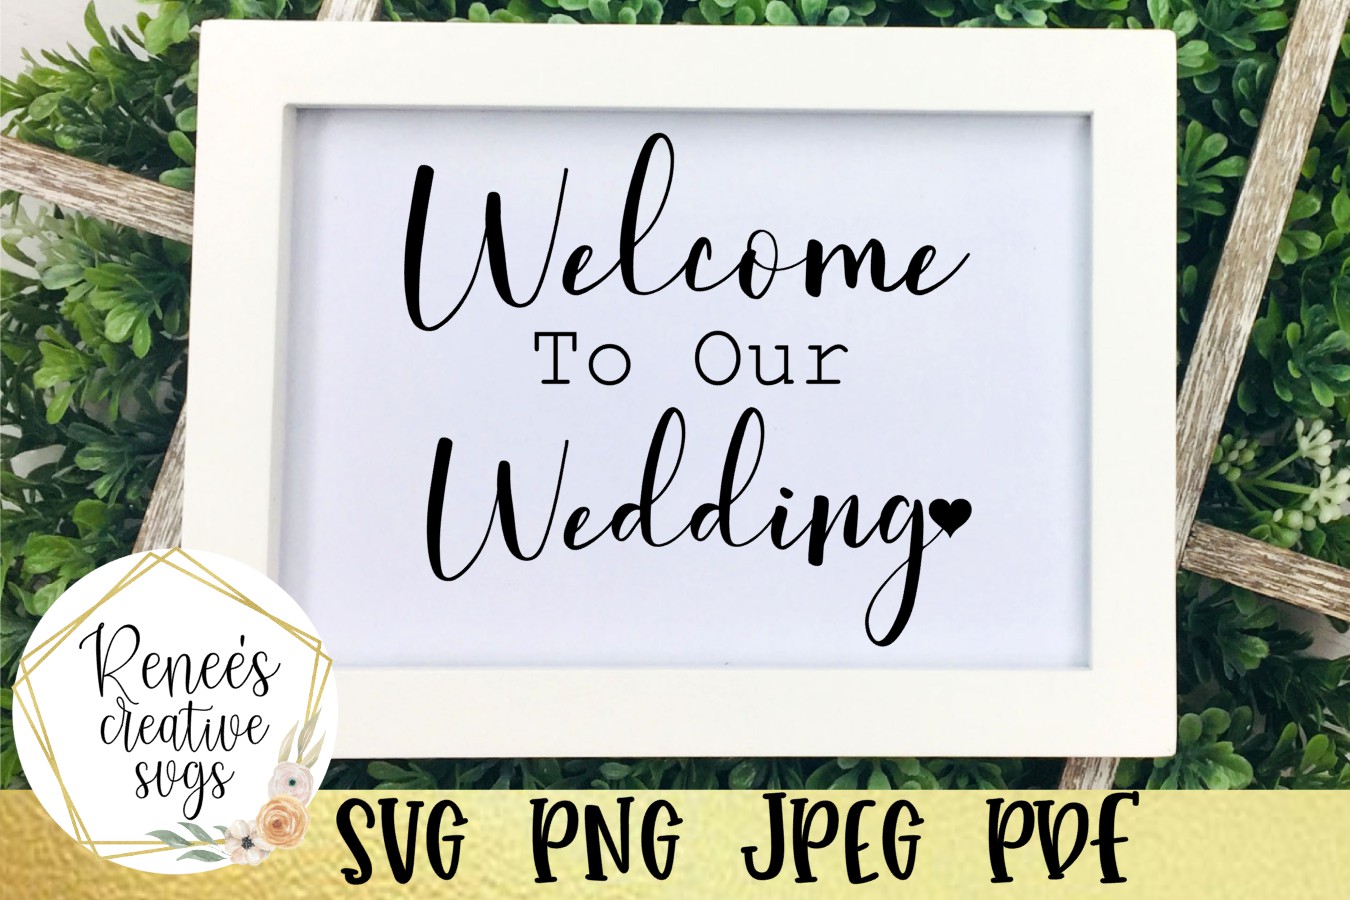 Download Welcome to our wedding |Wedding Quote Saying |SVG Cut File